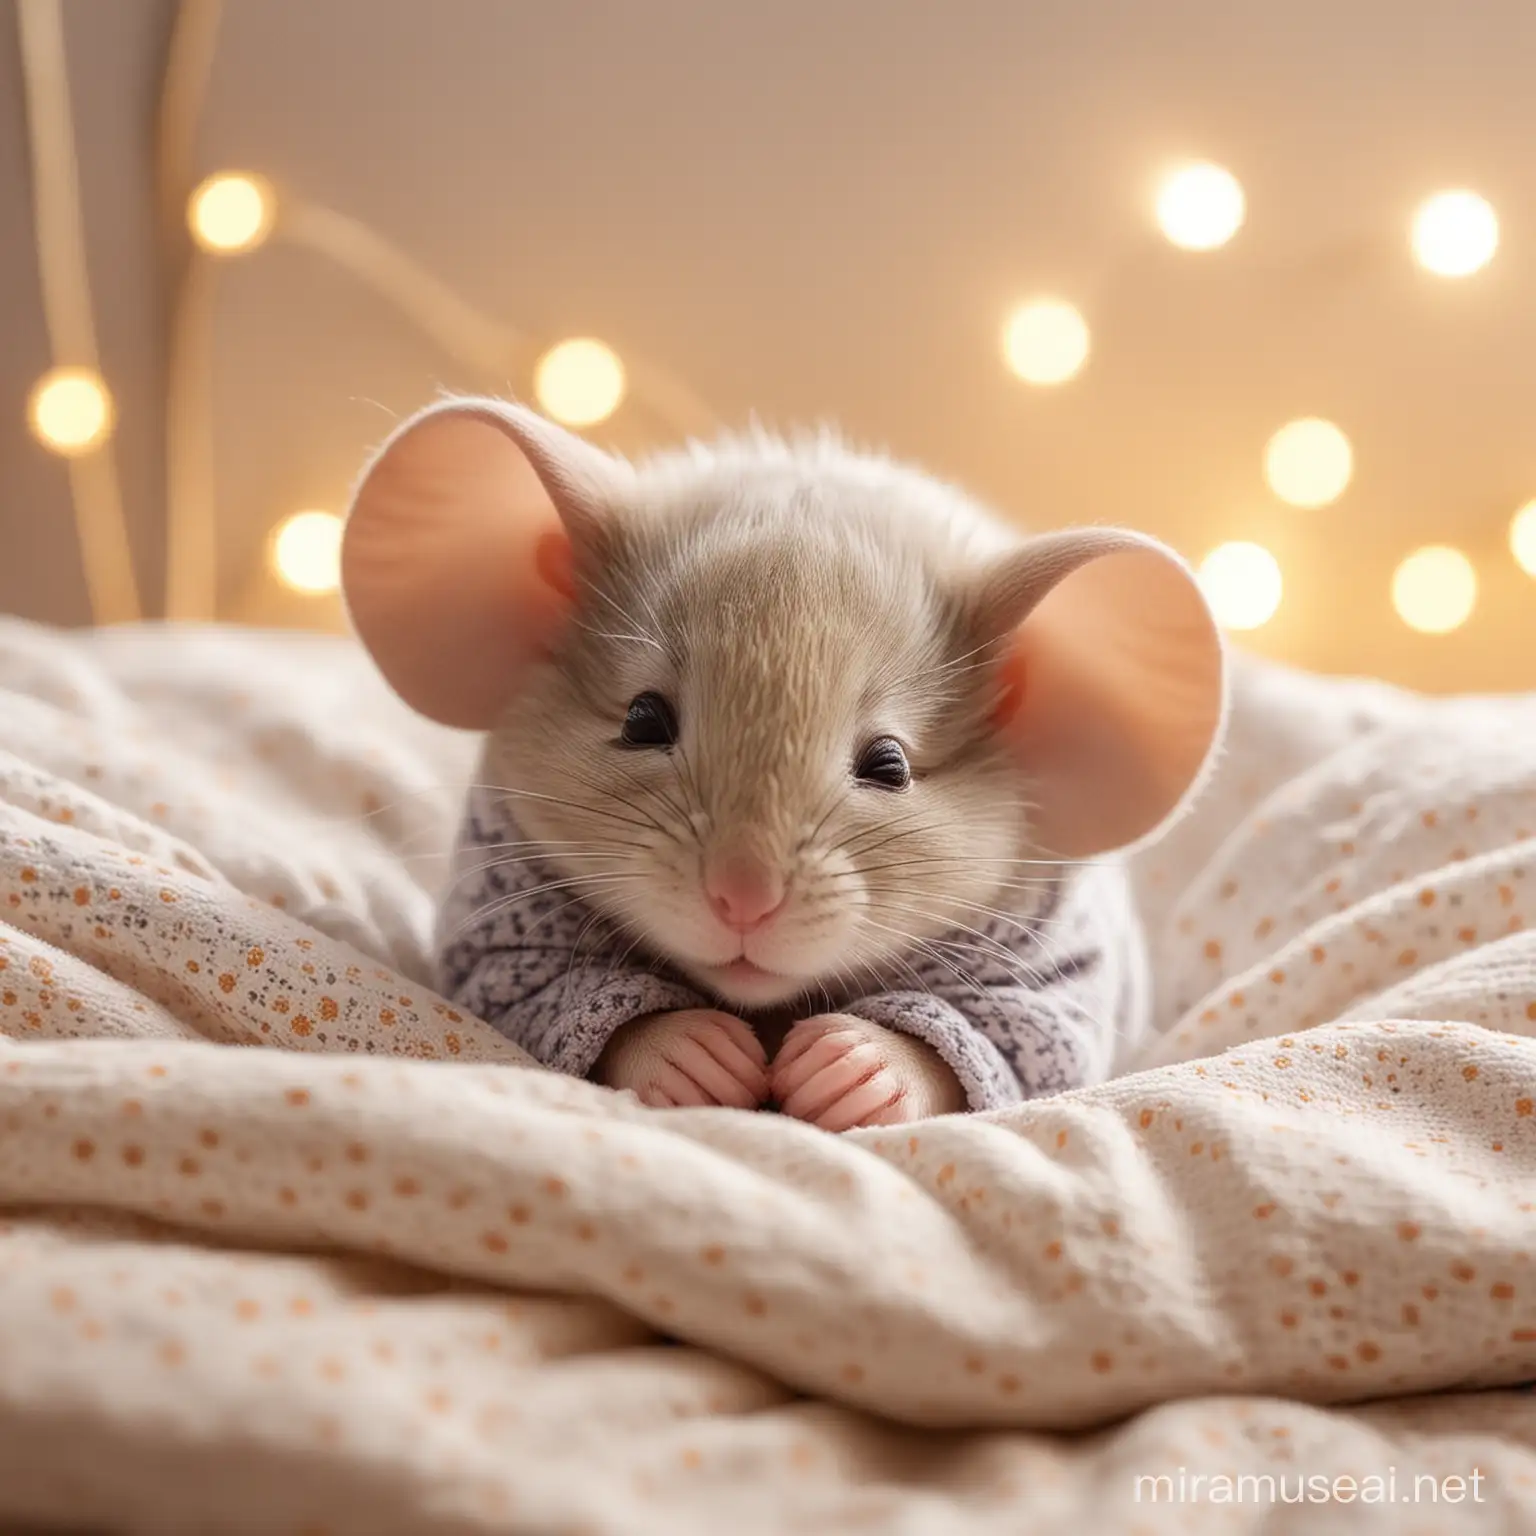 mouse is sleeping soundly in pajamas. Bokeh nursery background.